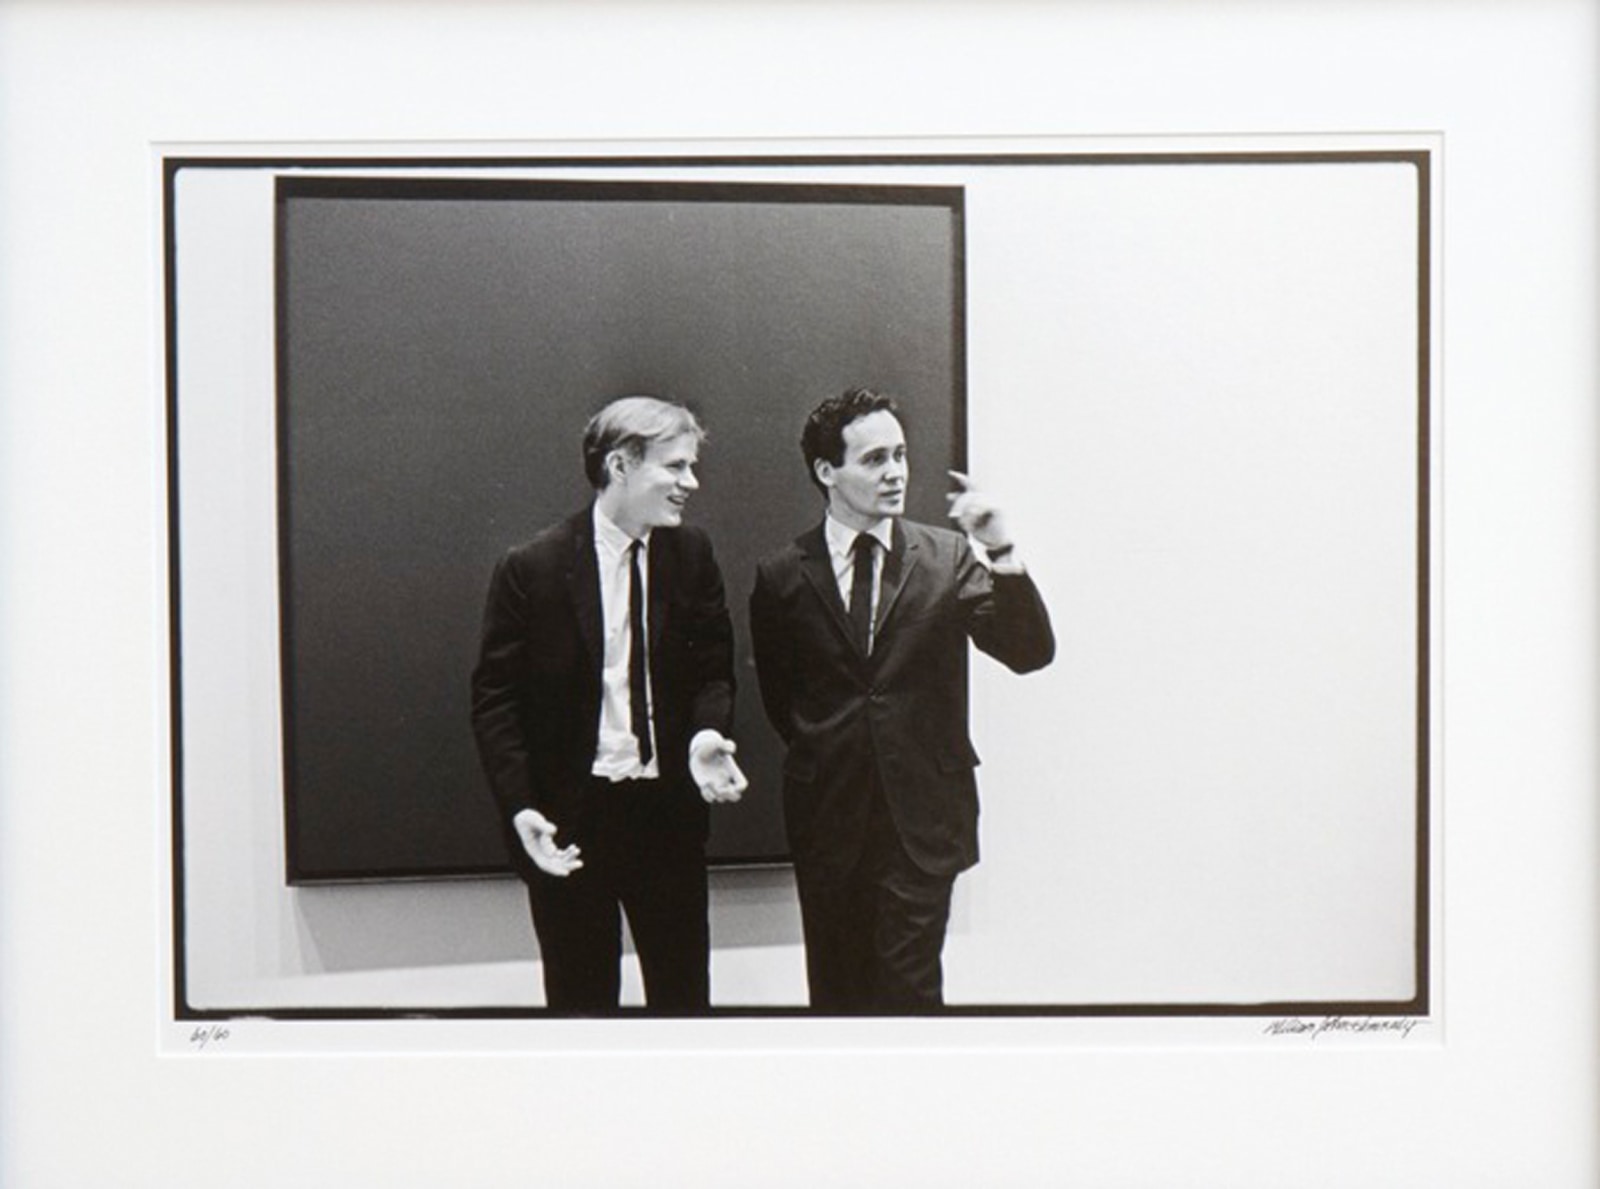 Black and white photograph of Andy Warhol and Indiana in front of an unidentified canvas by Ad Reinhardt at the opening of the exhibition Americans 1963 at the Museum of Modern Art, New York, May 21, 1963